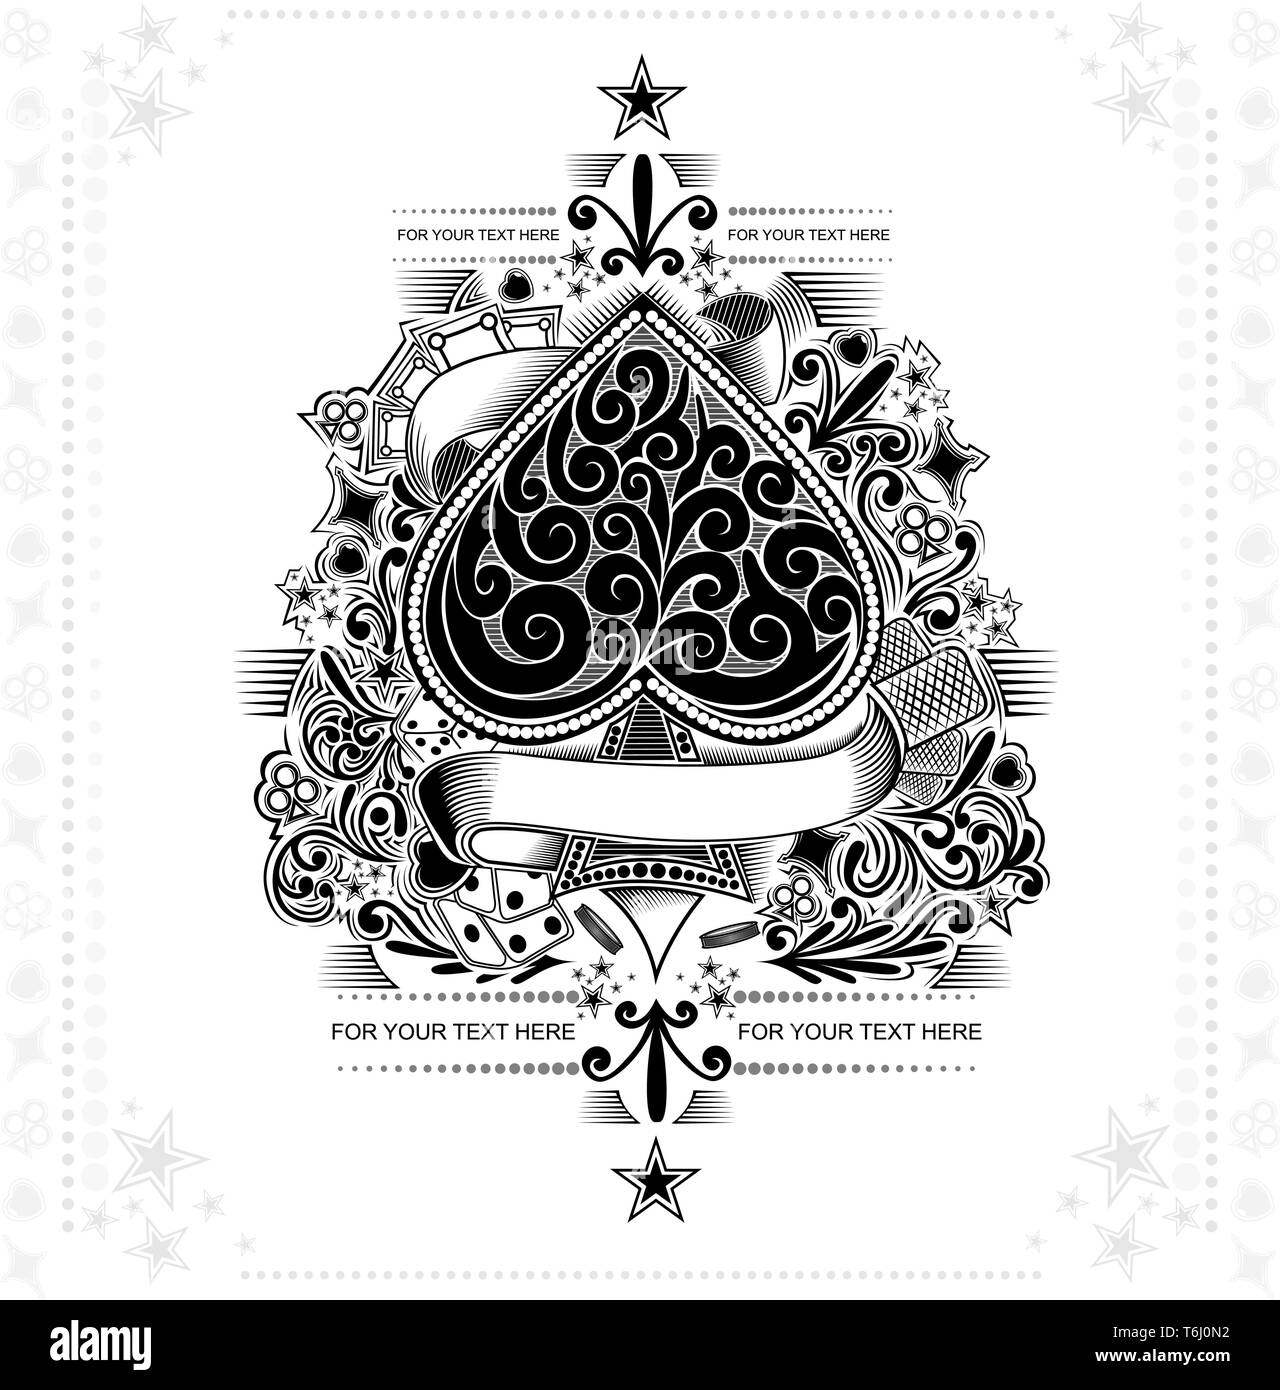 Ace of hearts Black and White Stock Photos & Images - Alamy